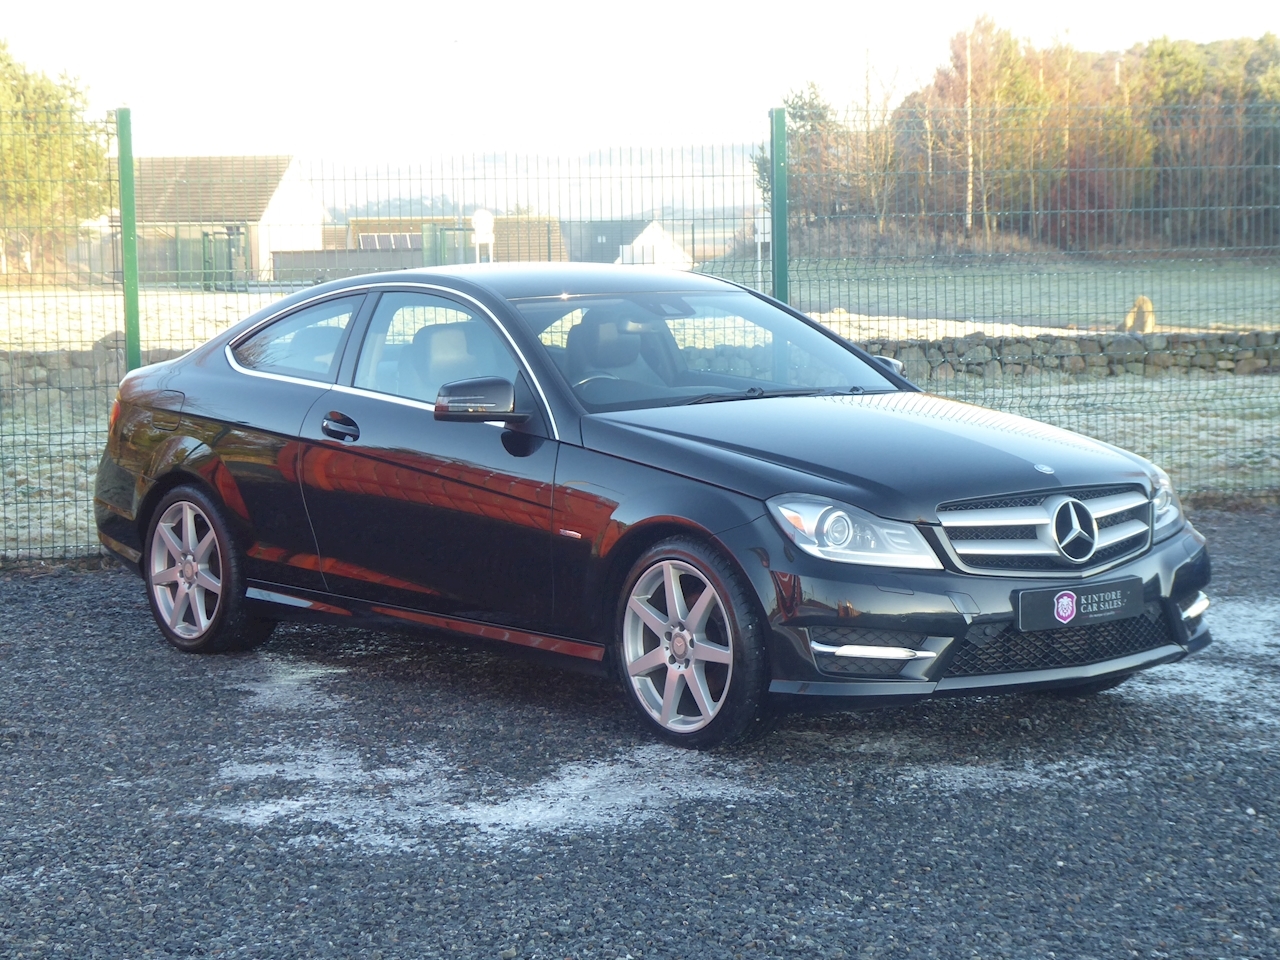 C Class C250 CDI BlueEFFICIENCY AMG Sport 2.2 2dr Coupe Automatic Diesel